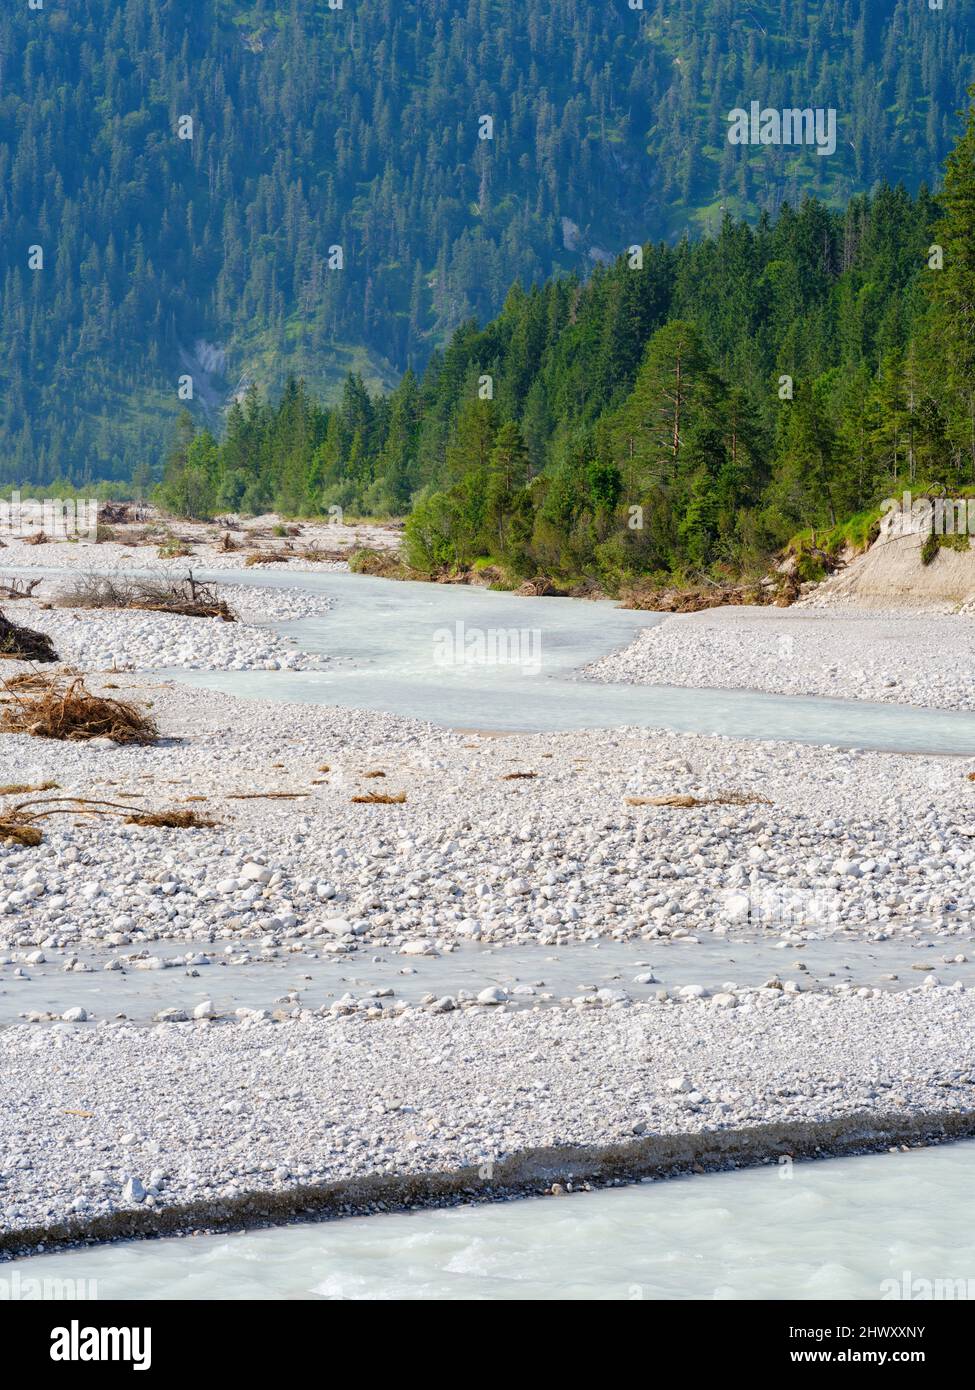 Creek Rissbach, one of the few wild braided rivers in Germany, near village Vorderriss in the Karwendel Mountains. Europe, Germany, Bavaria Stock Photo